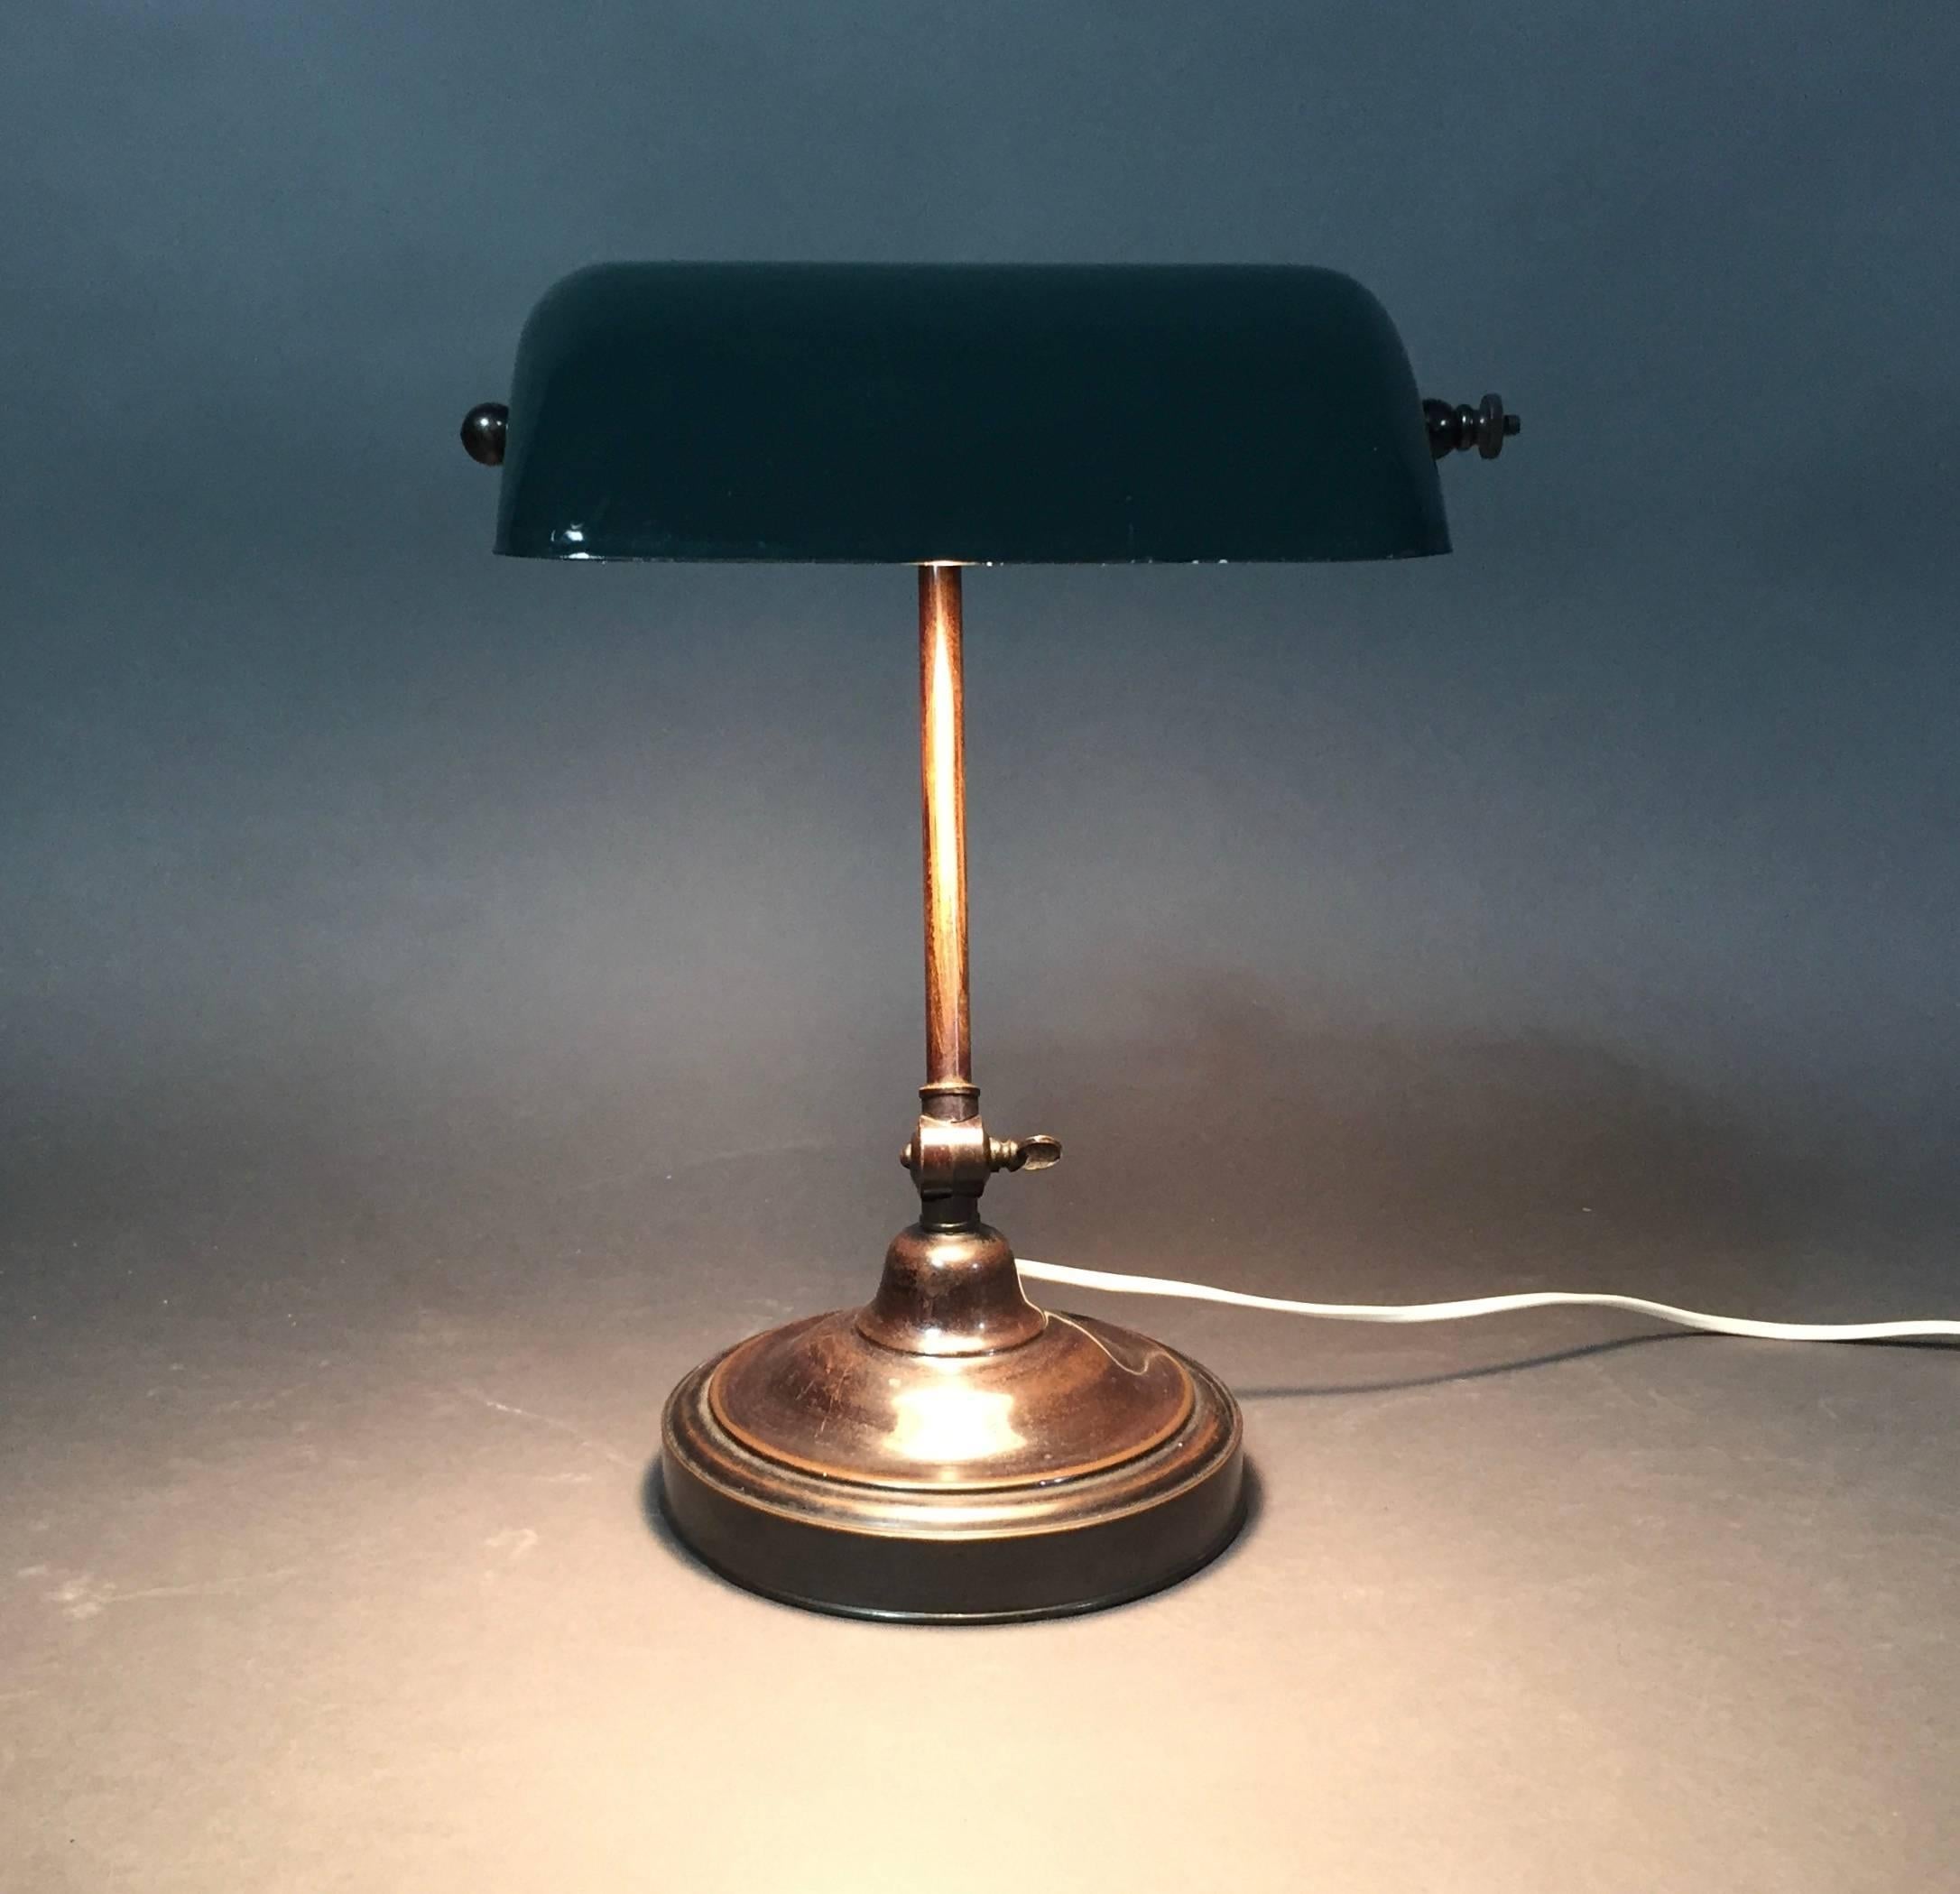 The first patent for a banker's lamp was filed on 11 May 1909 by Harrison D. McFaddin and were produced and sold under the brand name Emeralite (